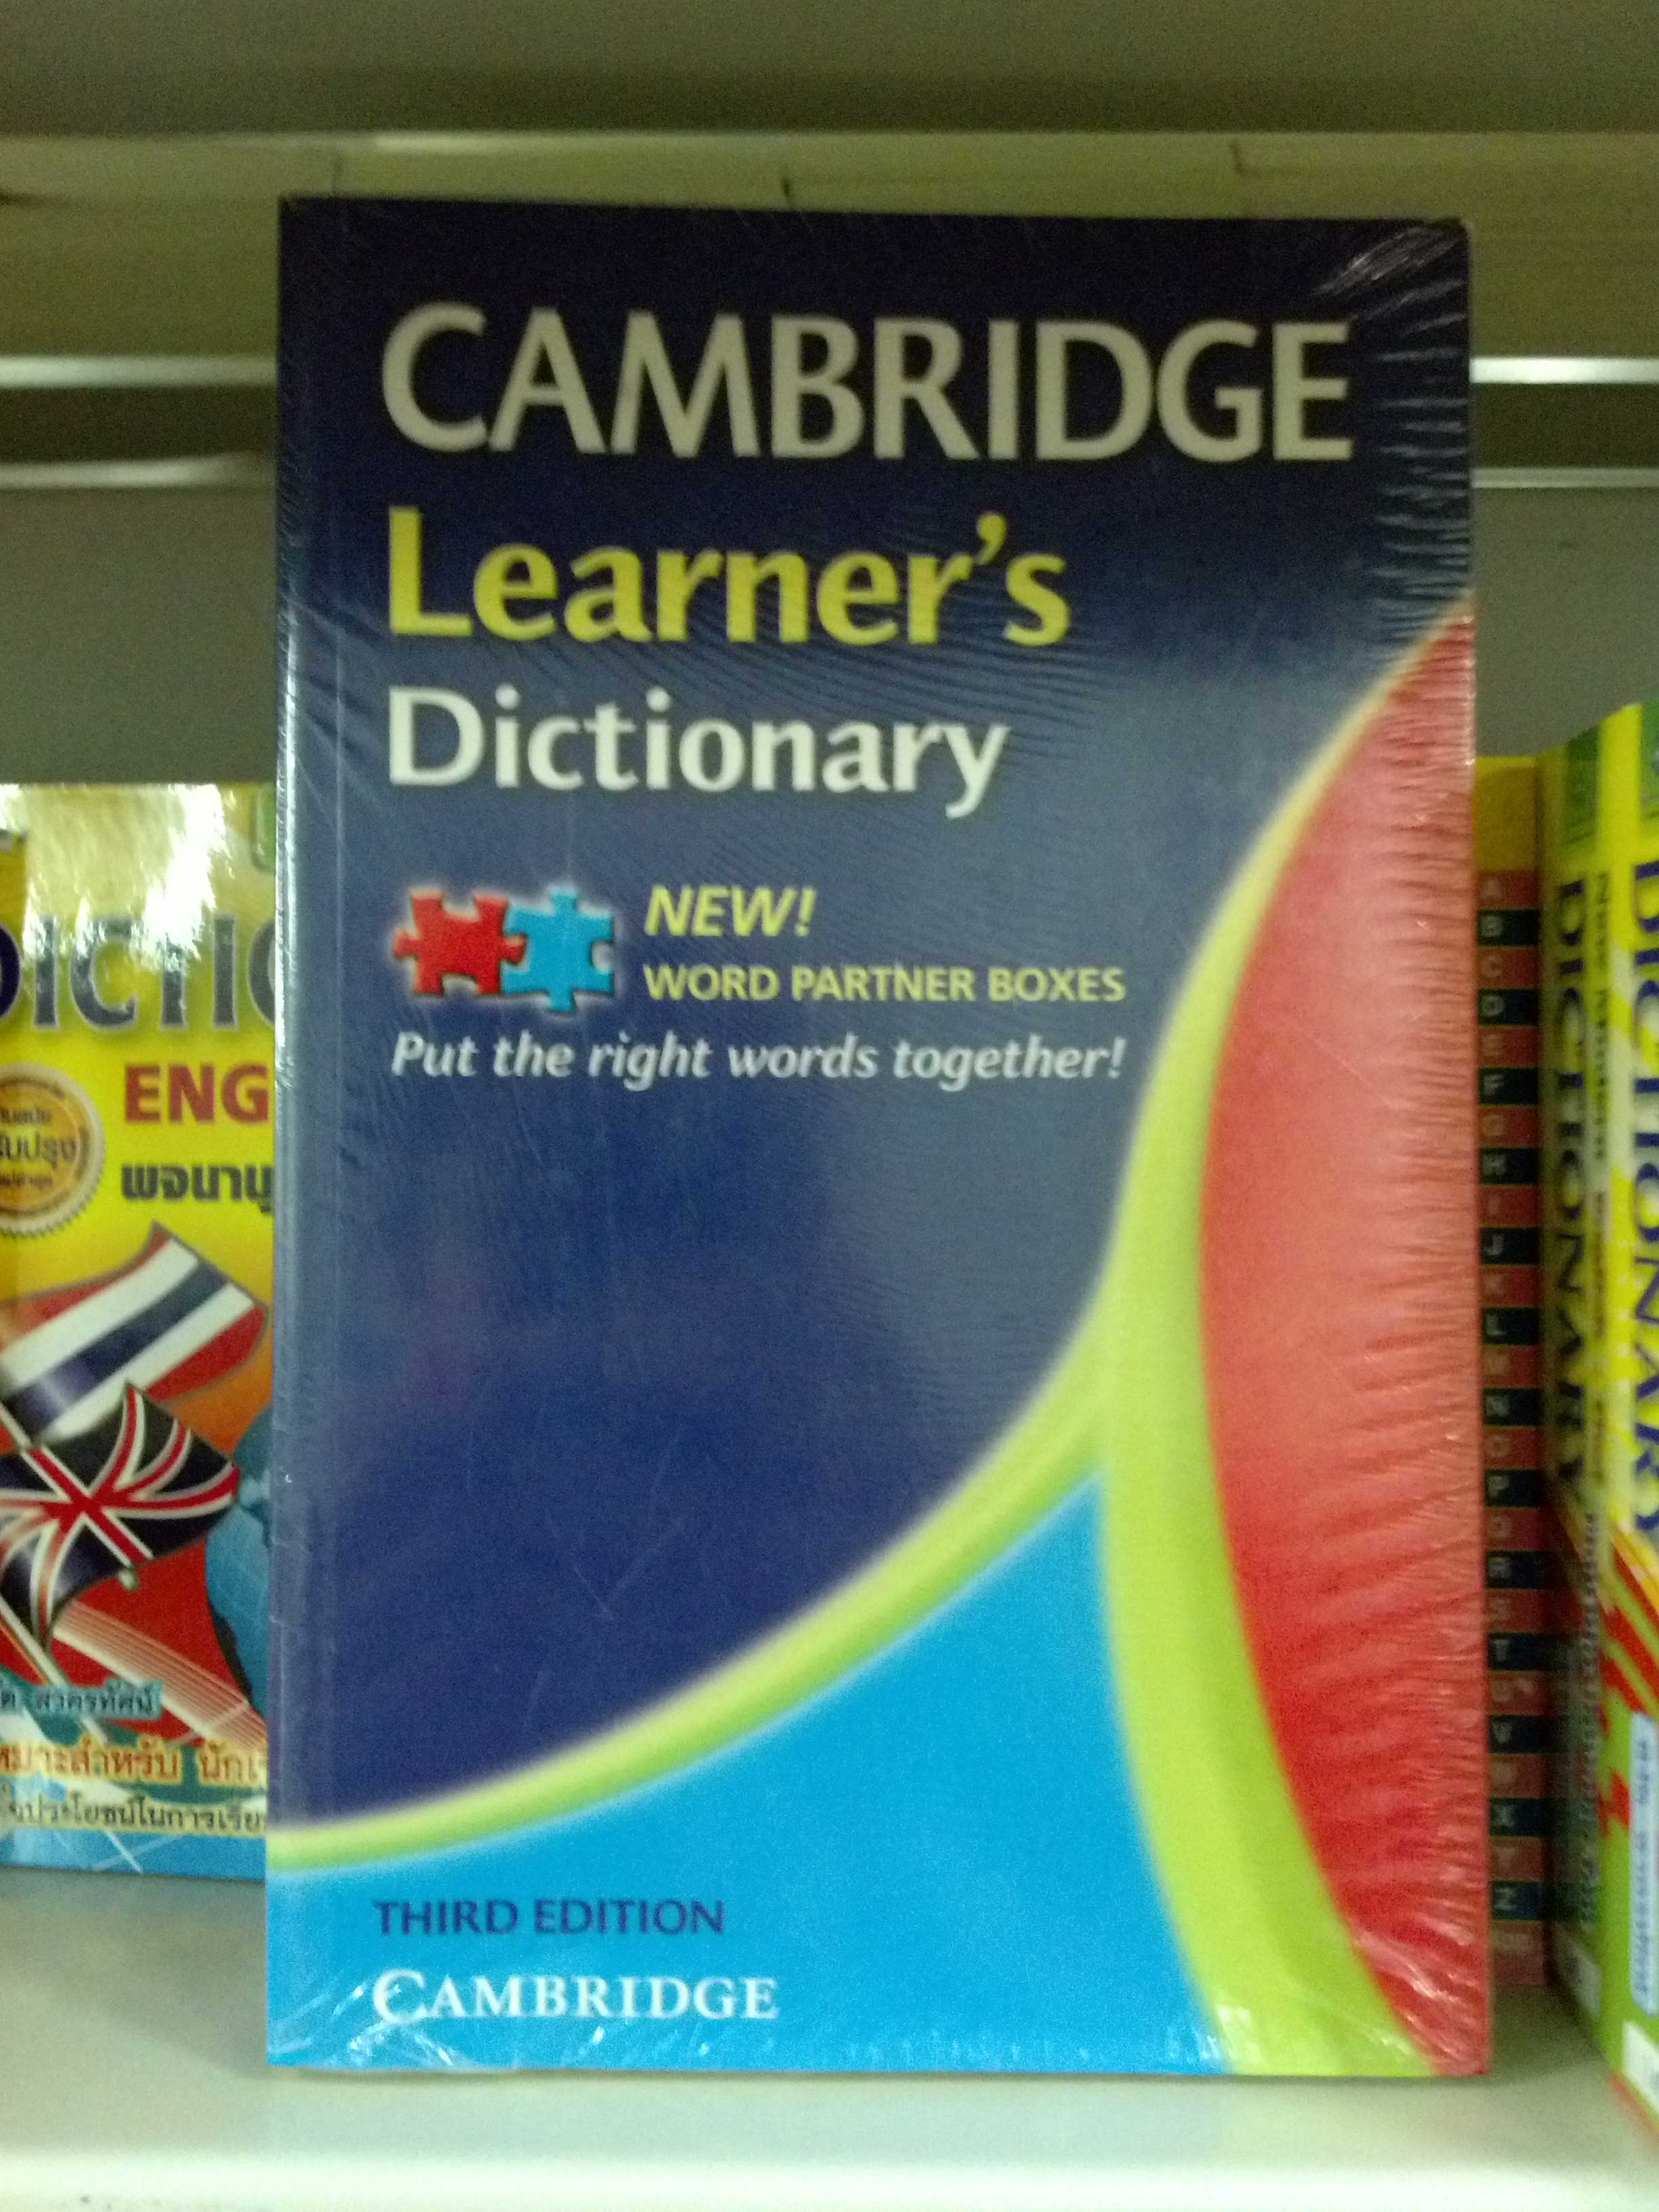 SELECTIVE English meaning - Cambridge Dictionary